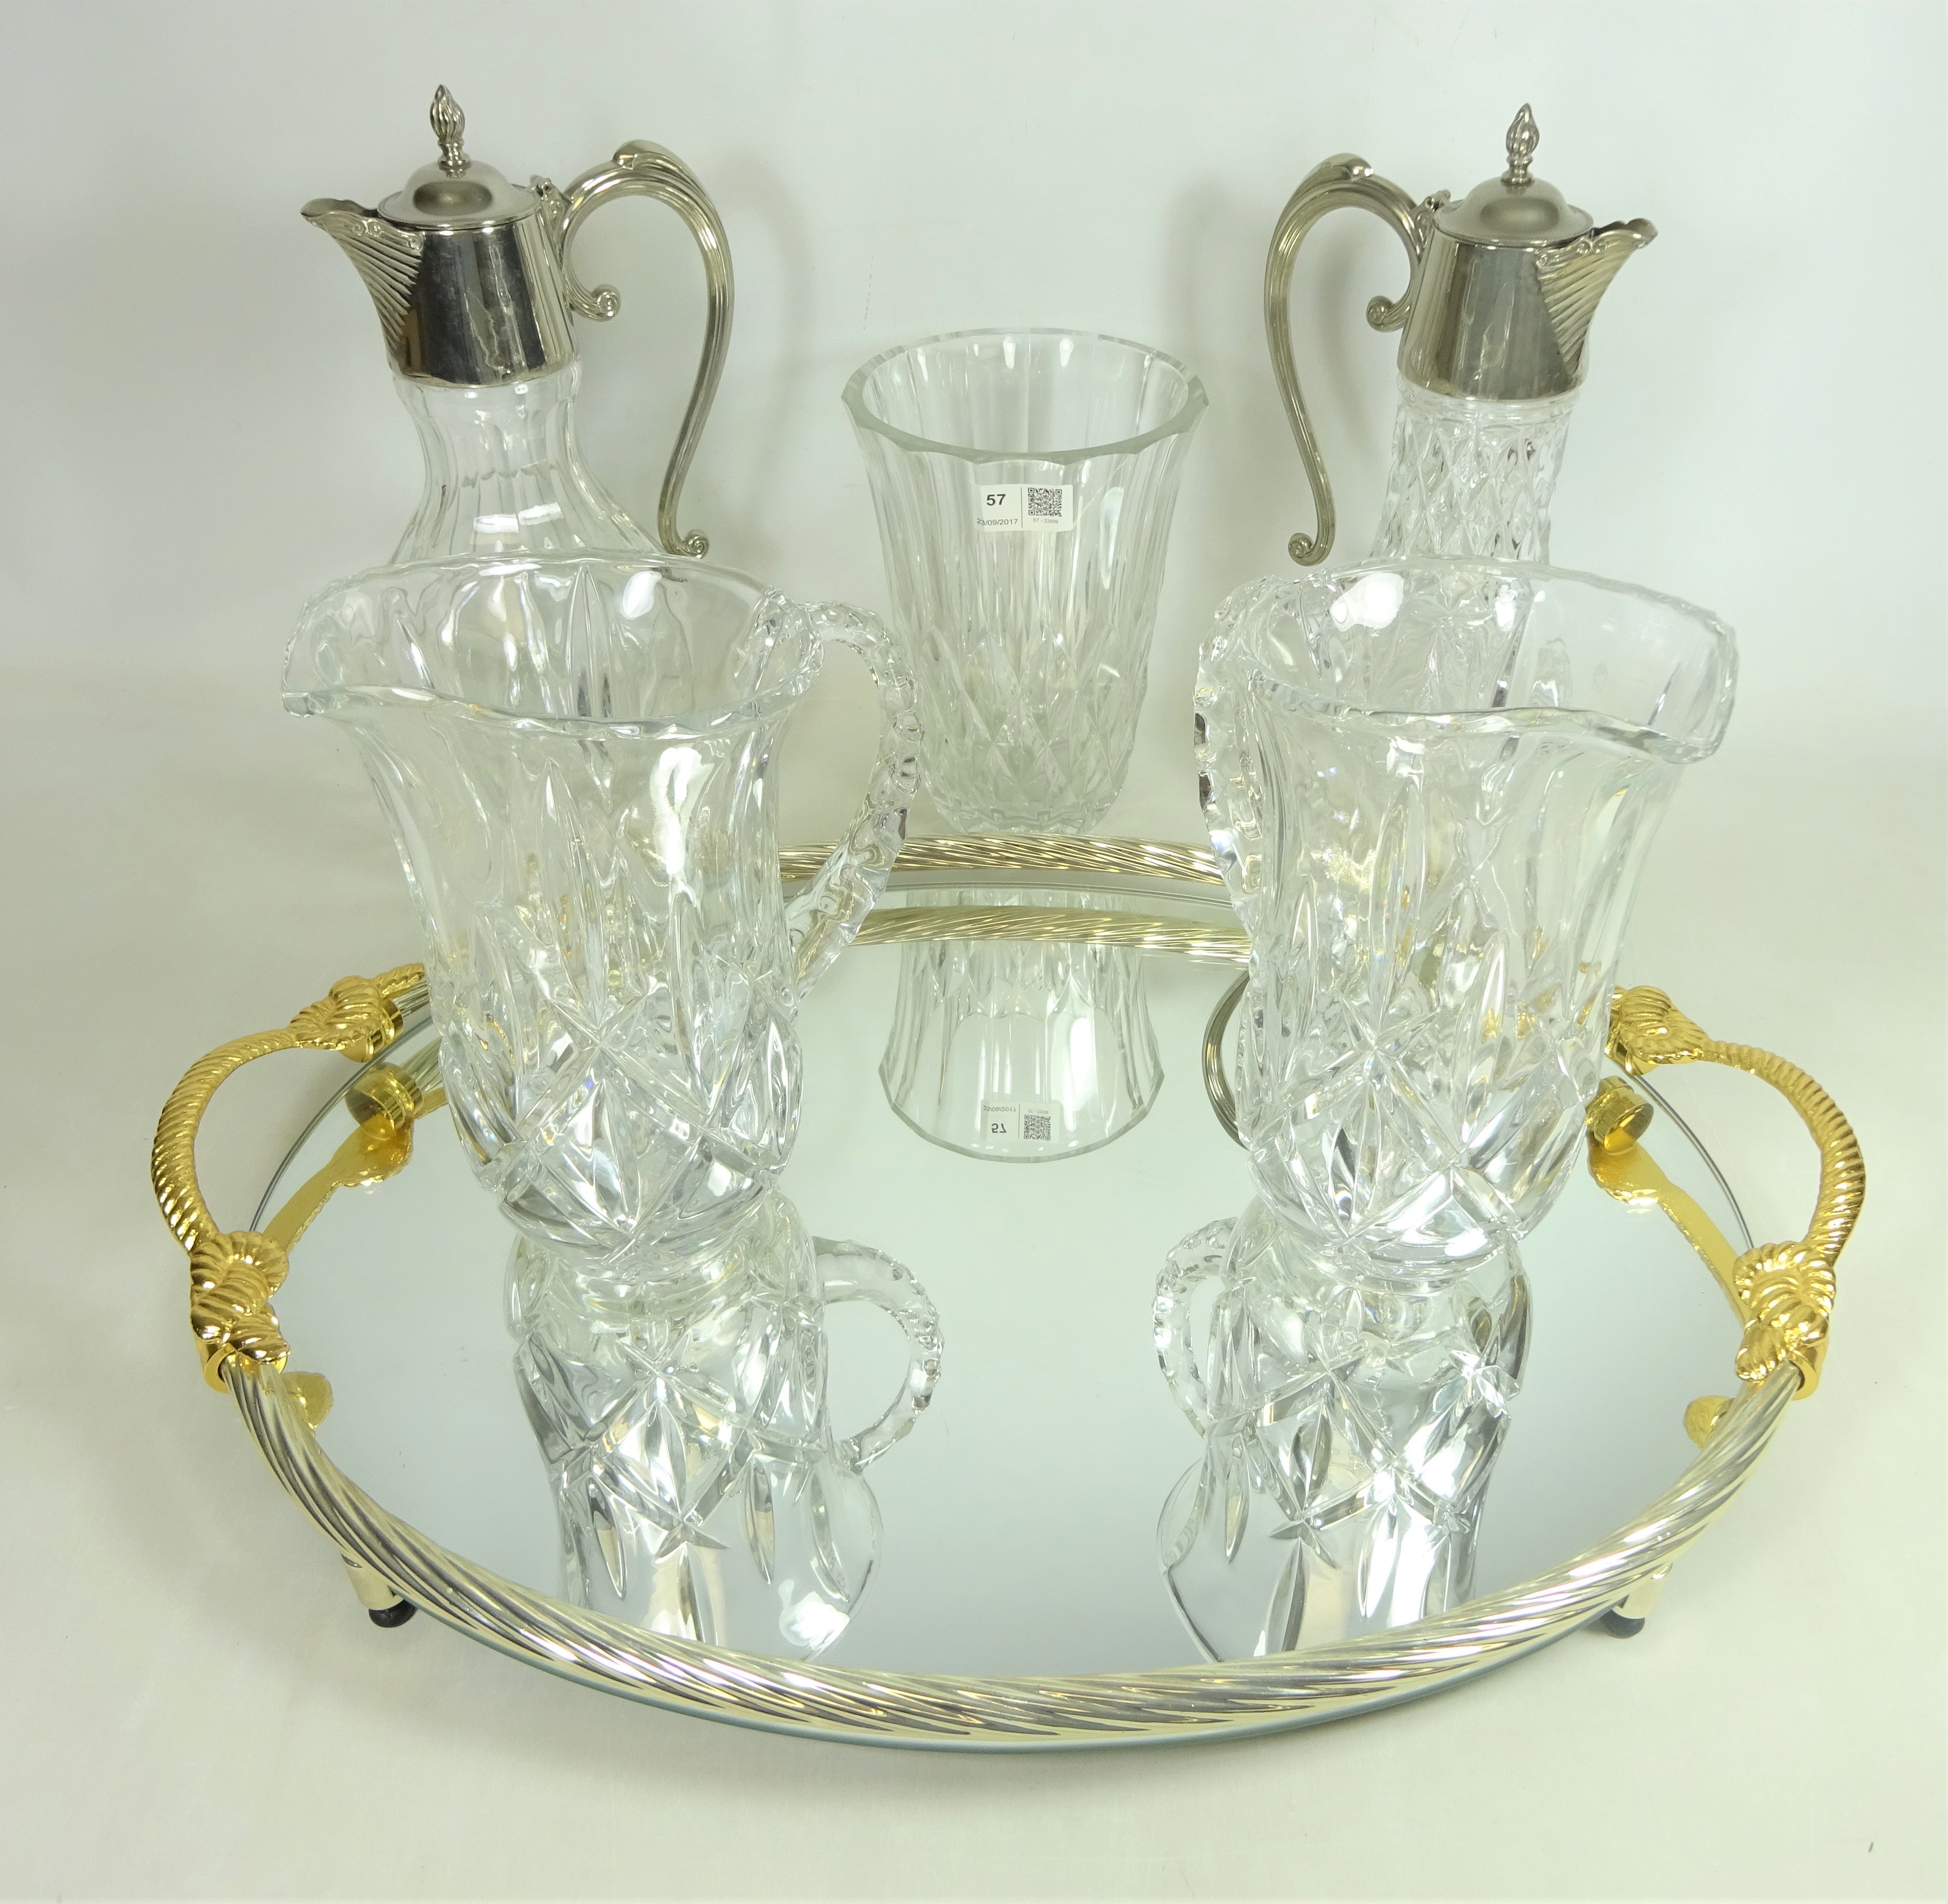 Two Claret jugs with silver plated mounts, Val Saint Lambert cut glass vase with signature to base,